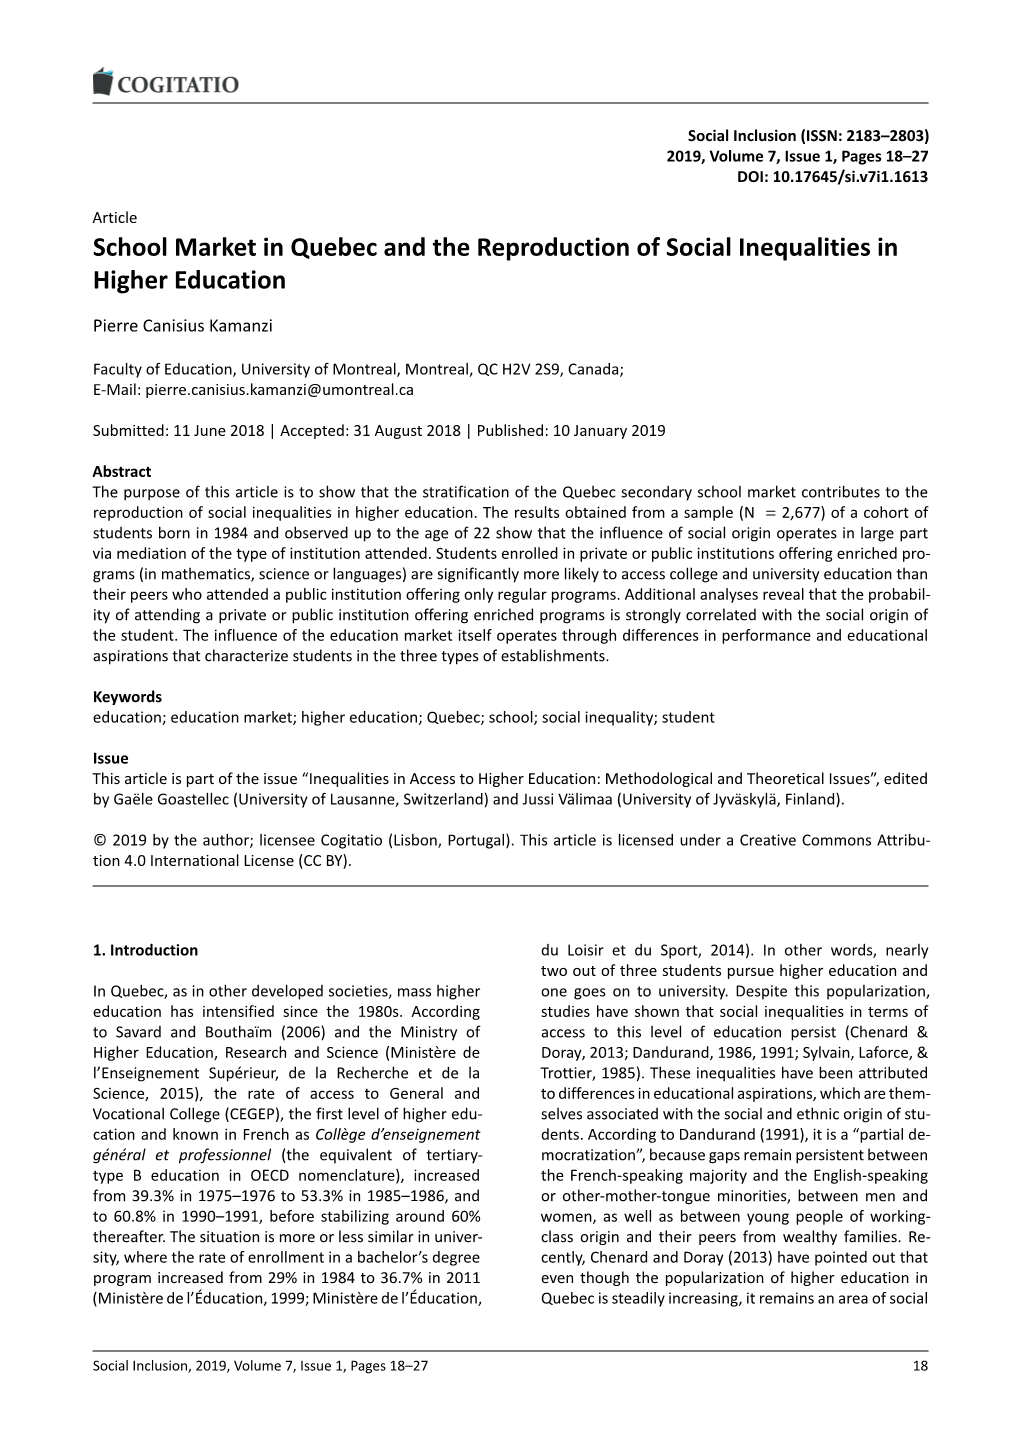 School Market in Quebec and the Reproduction of Social Inequalities in Higher Education